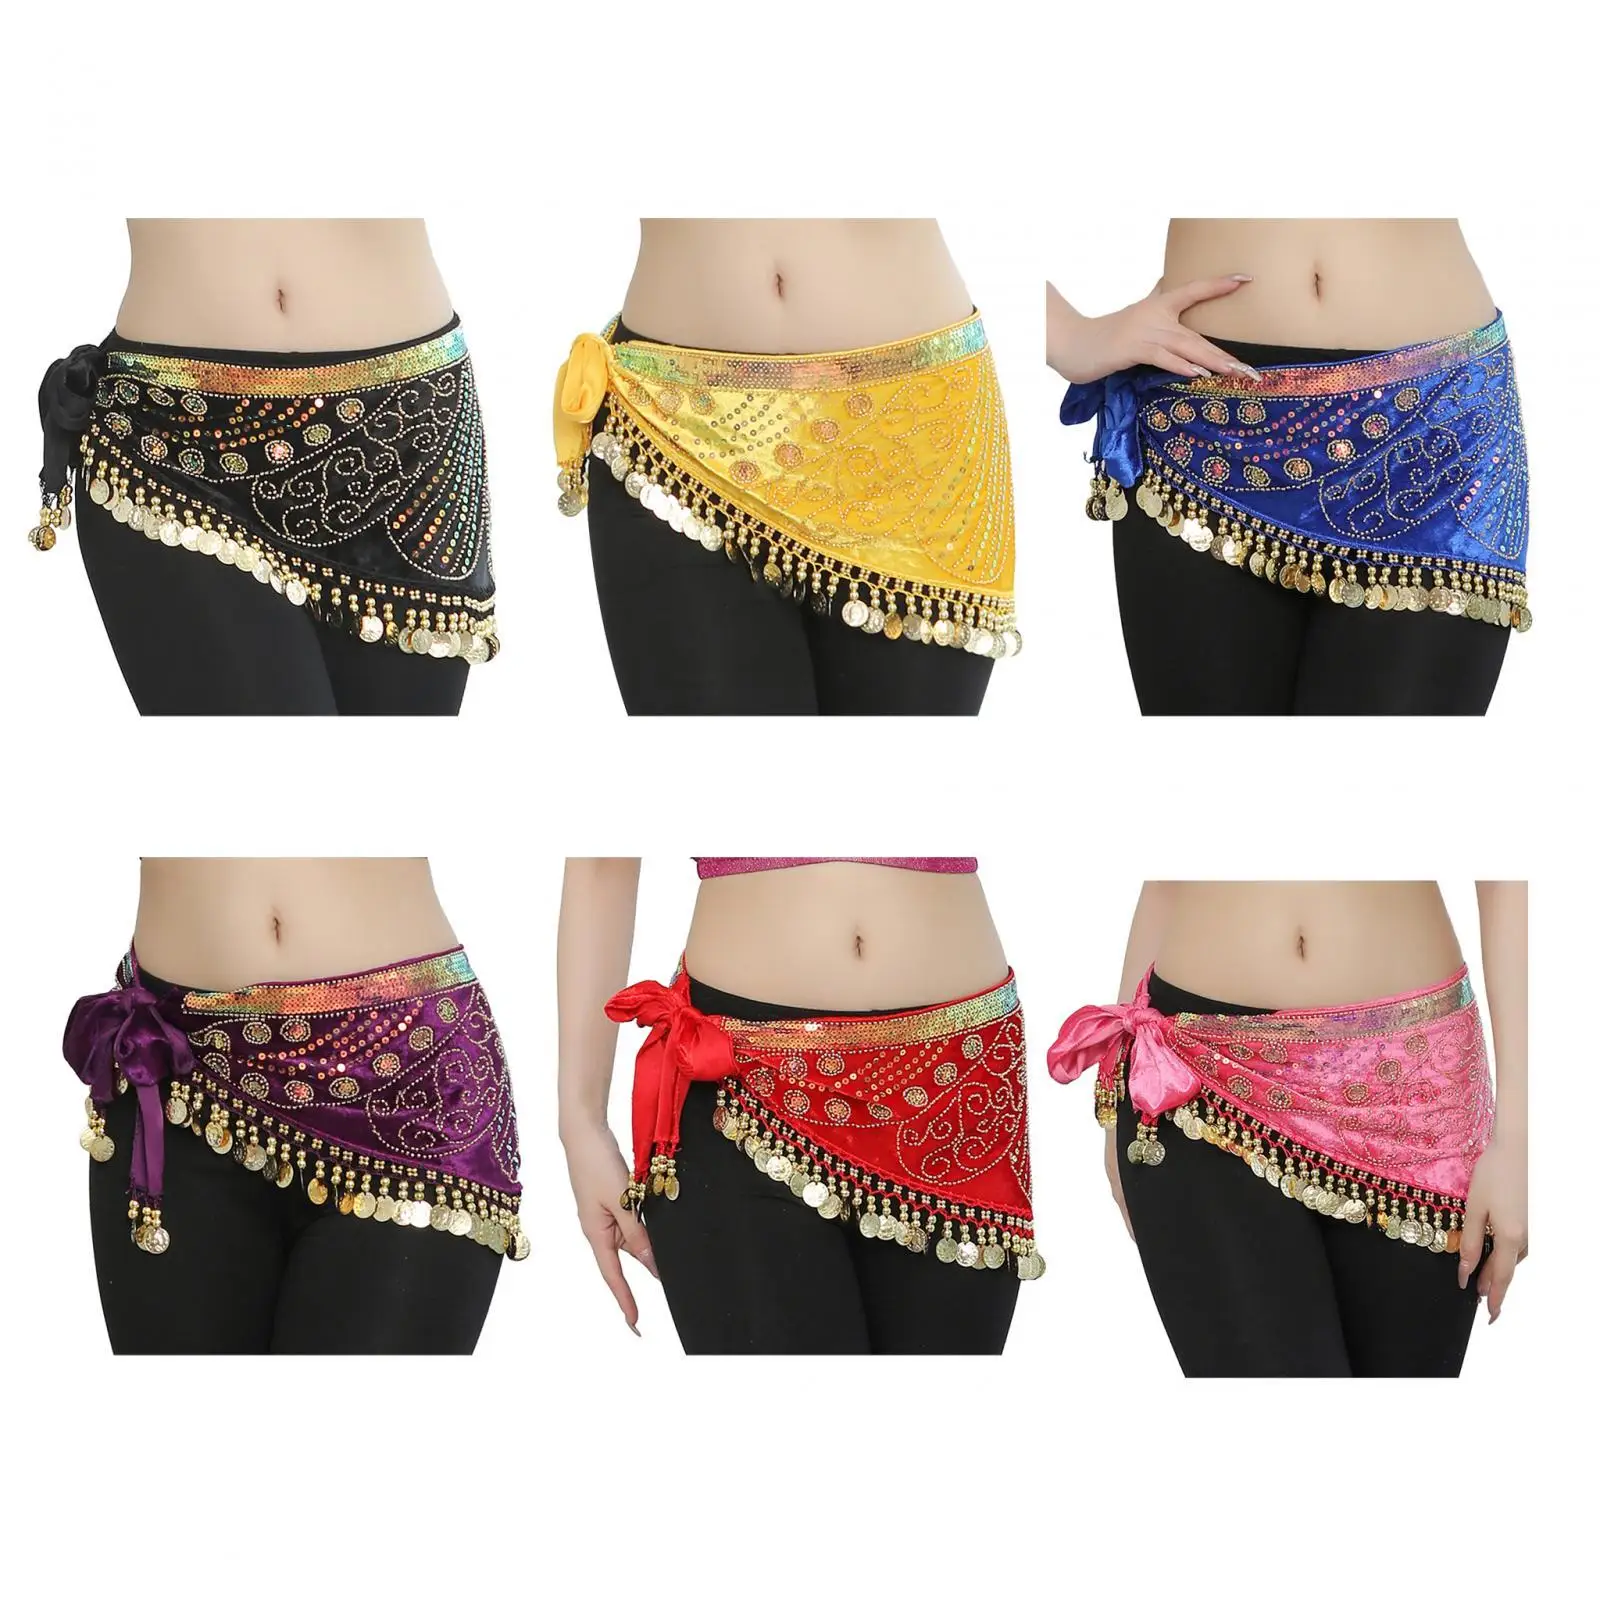 

Belly Dance Hip Scarf Wrap Sparkly with Dangling Gold Coins Shiny Sequins Skirt for Rumba Performance Tango Latin Dance Festival